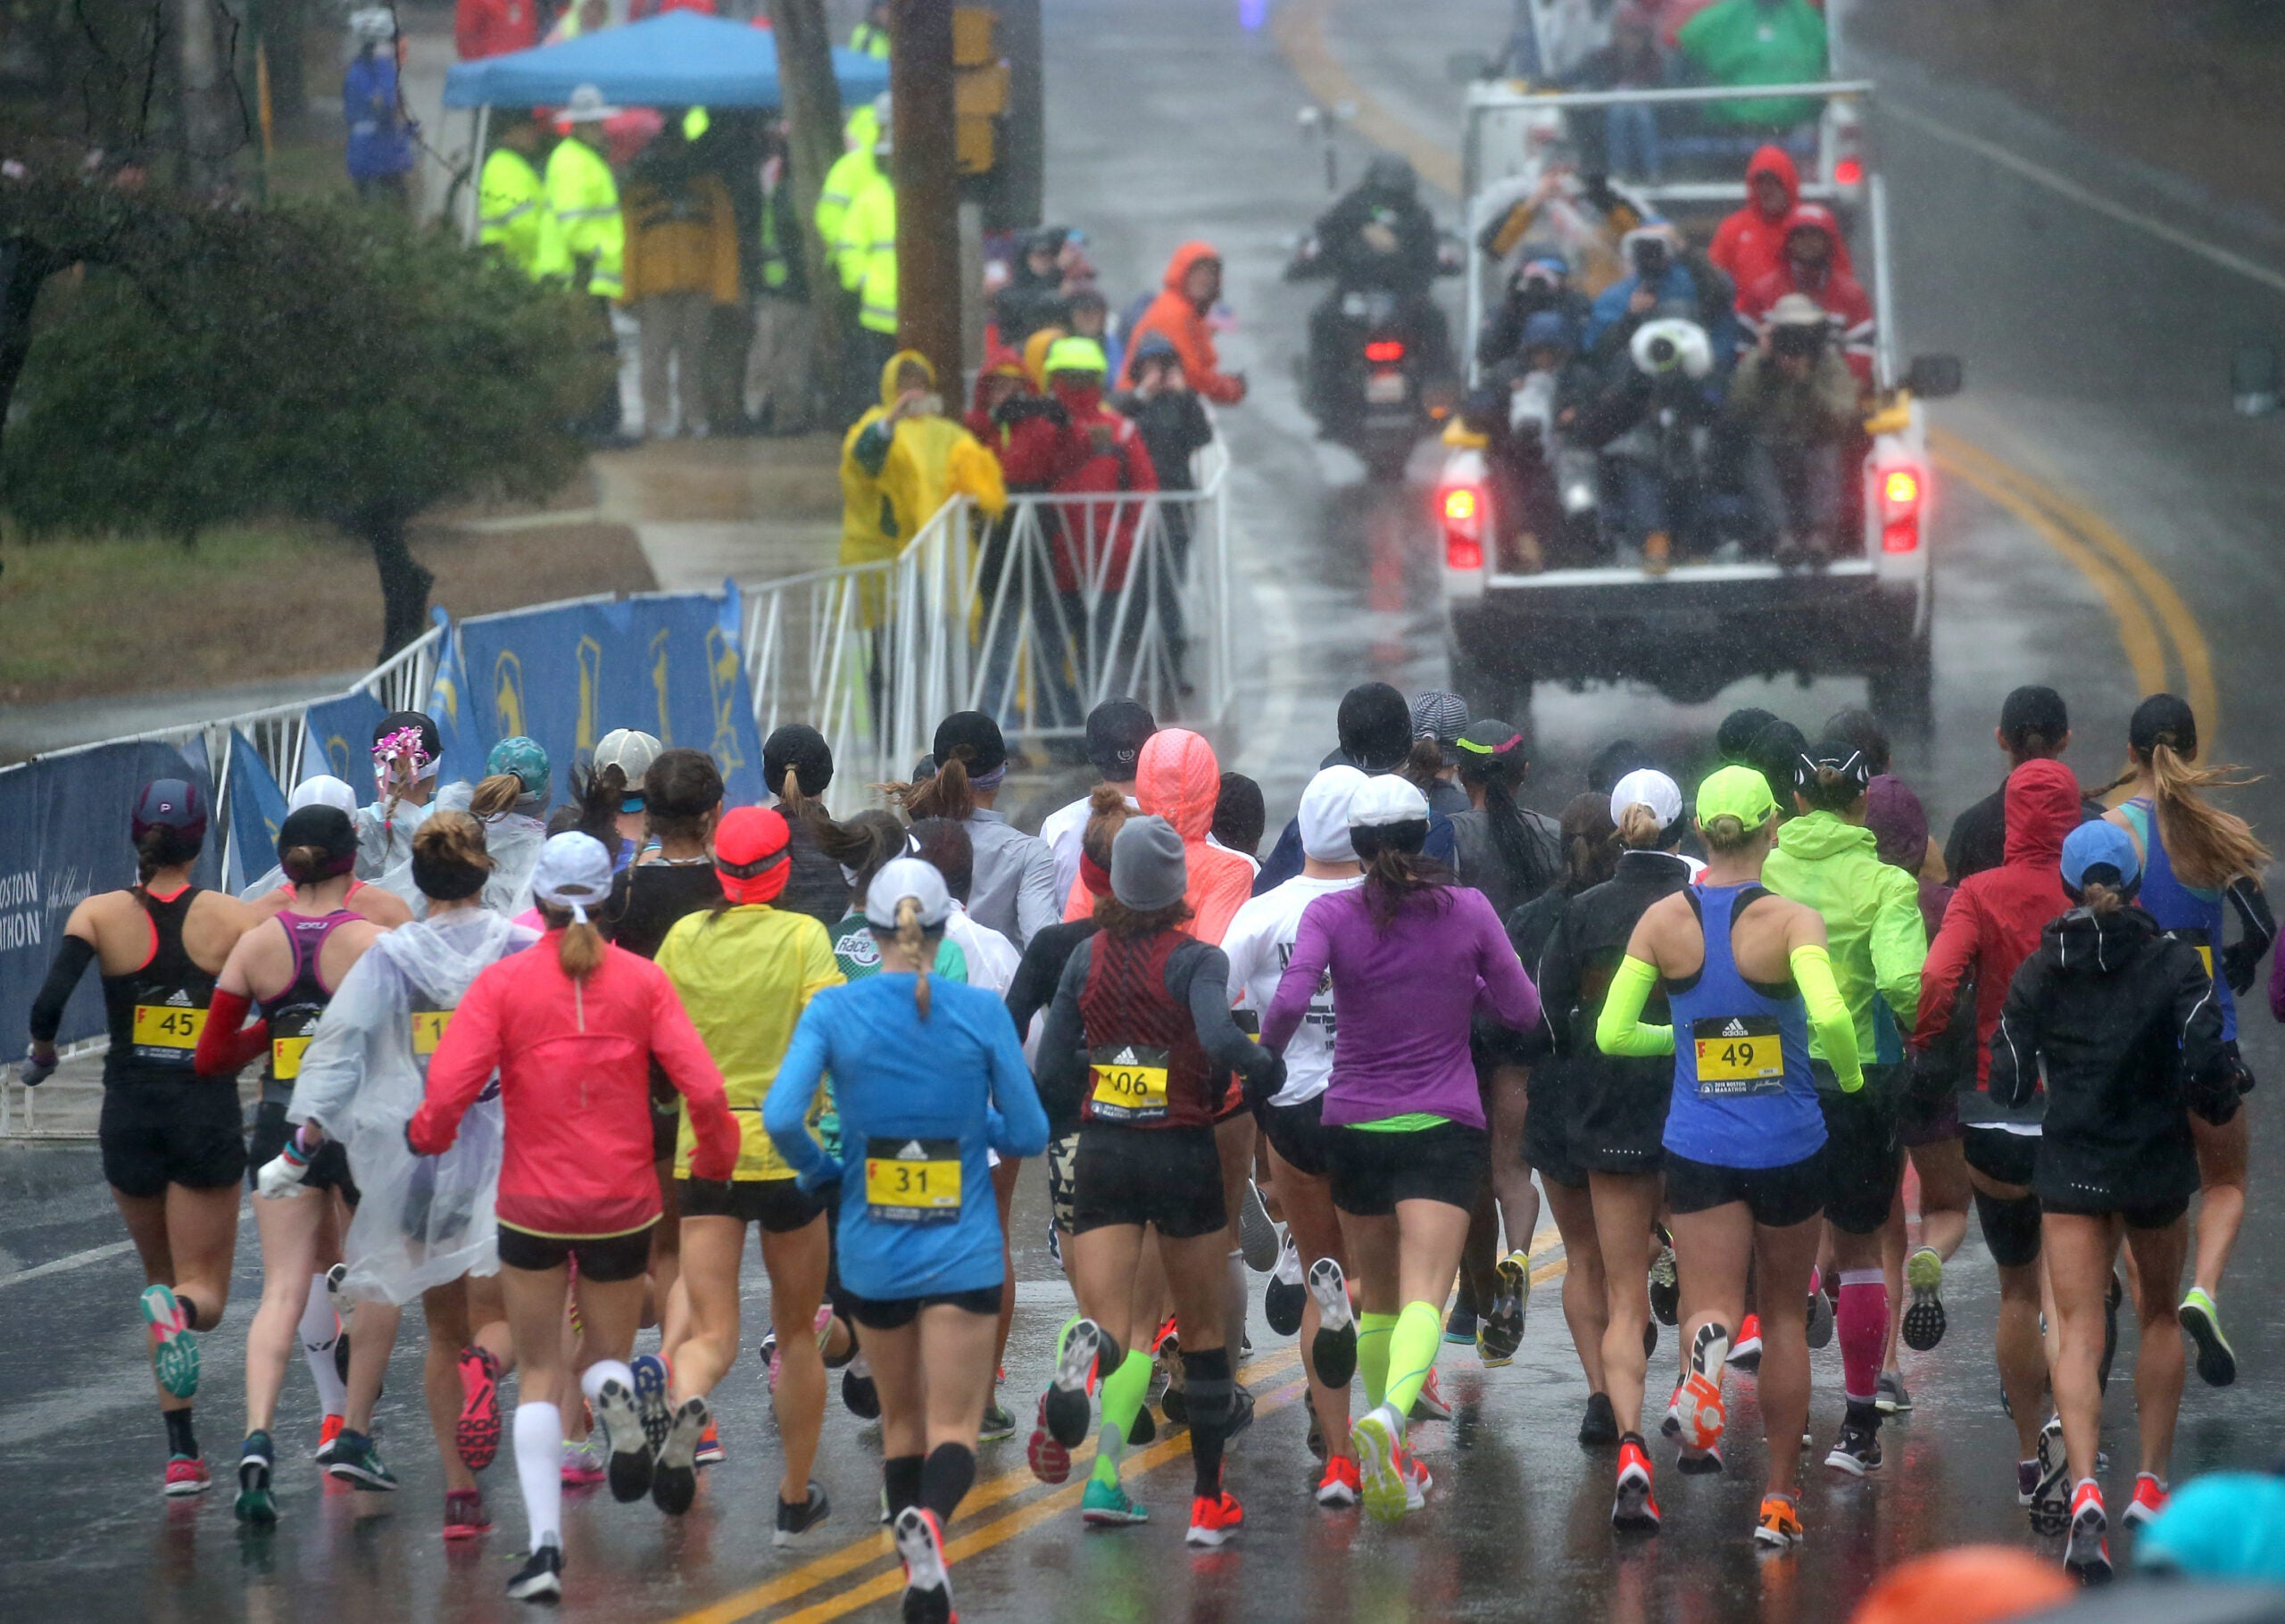 Is today the worst weather in Boston Marathon history? It depends how